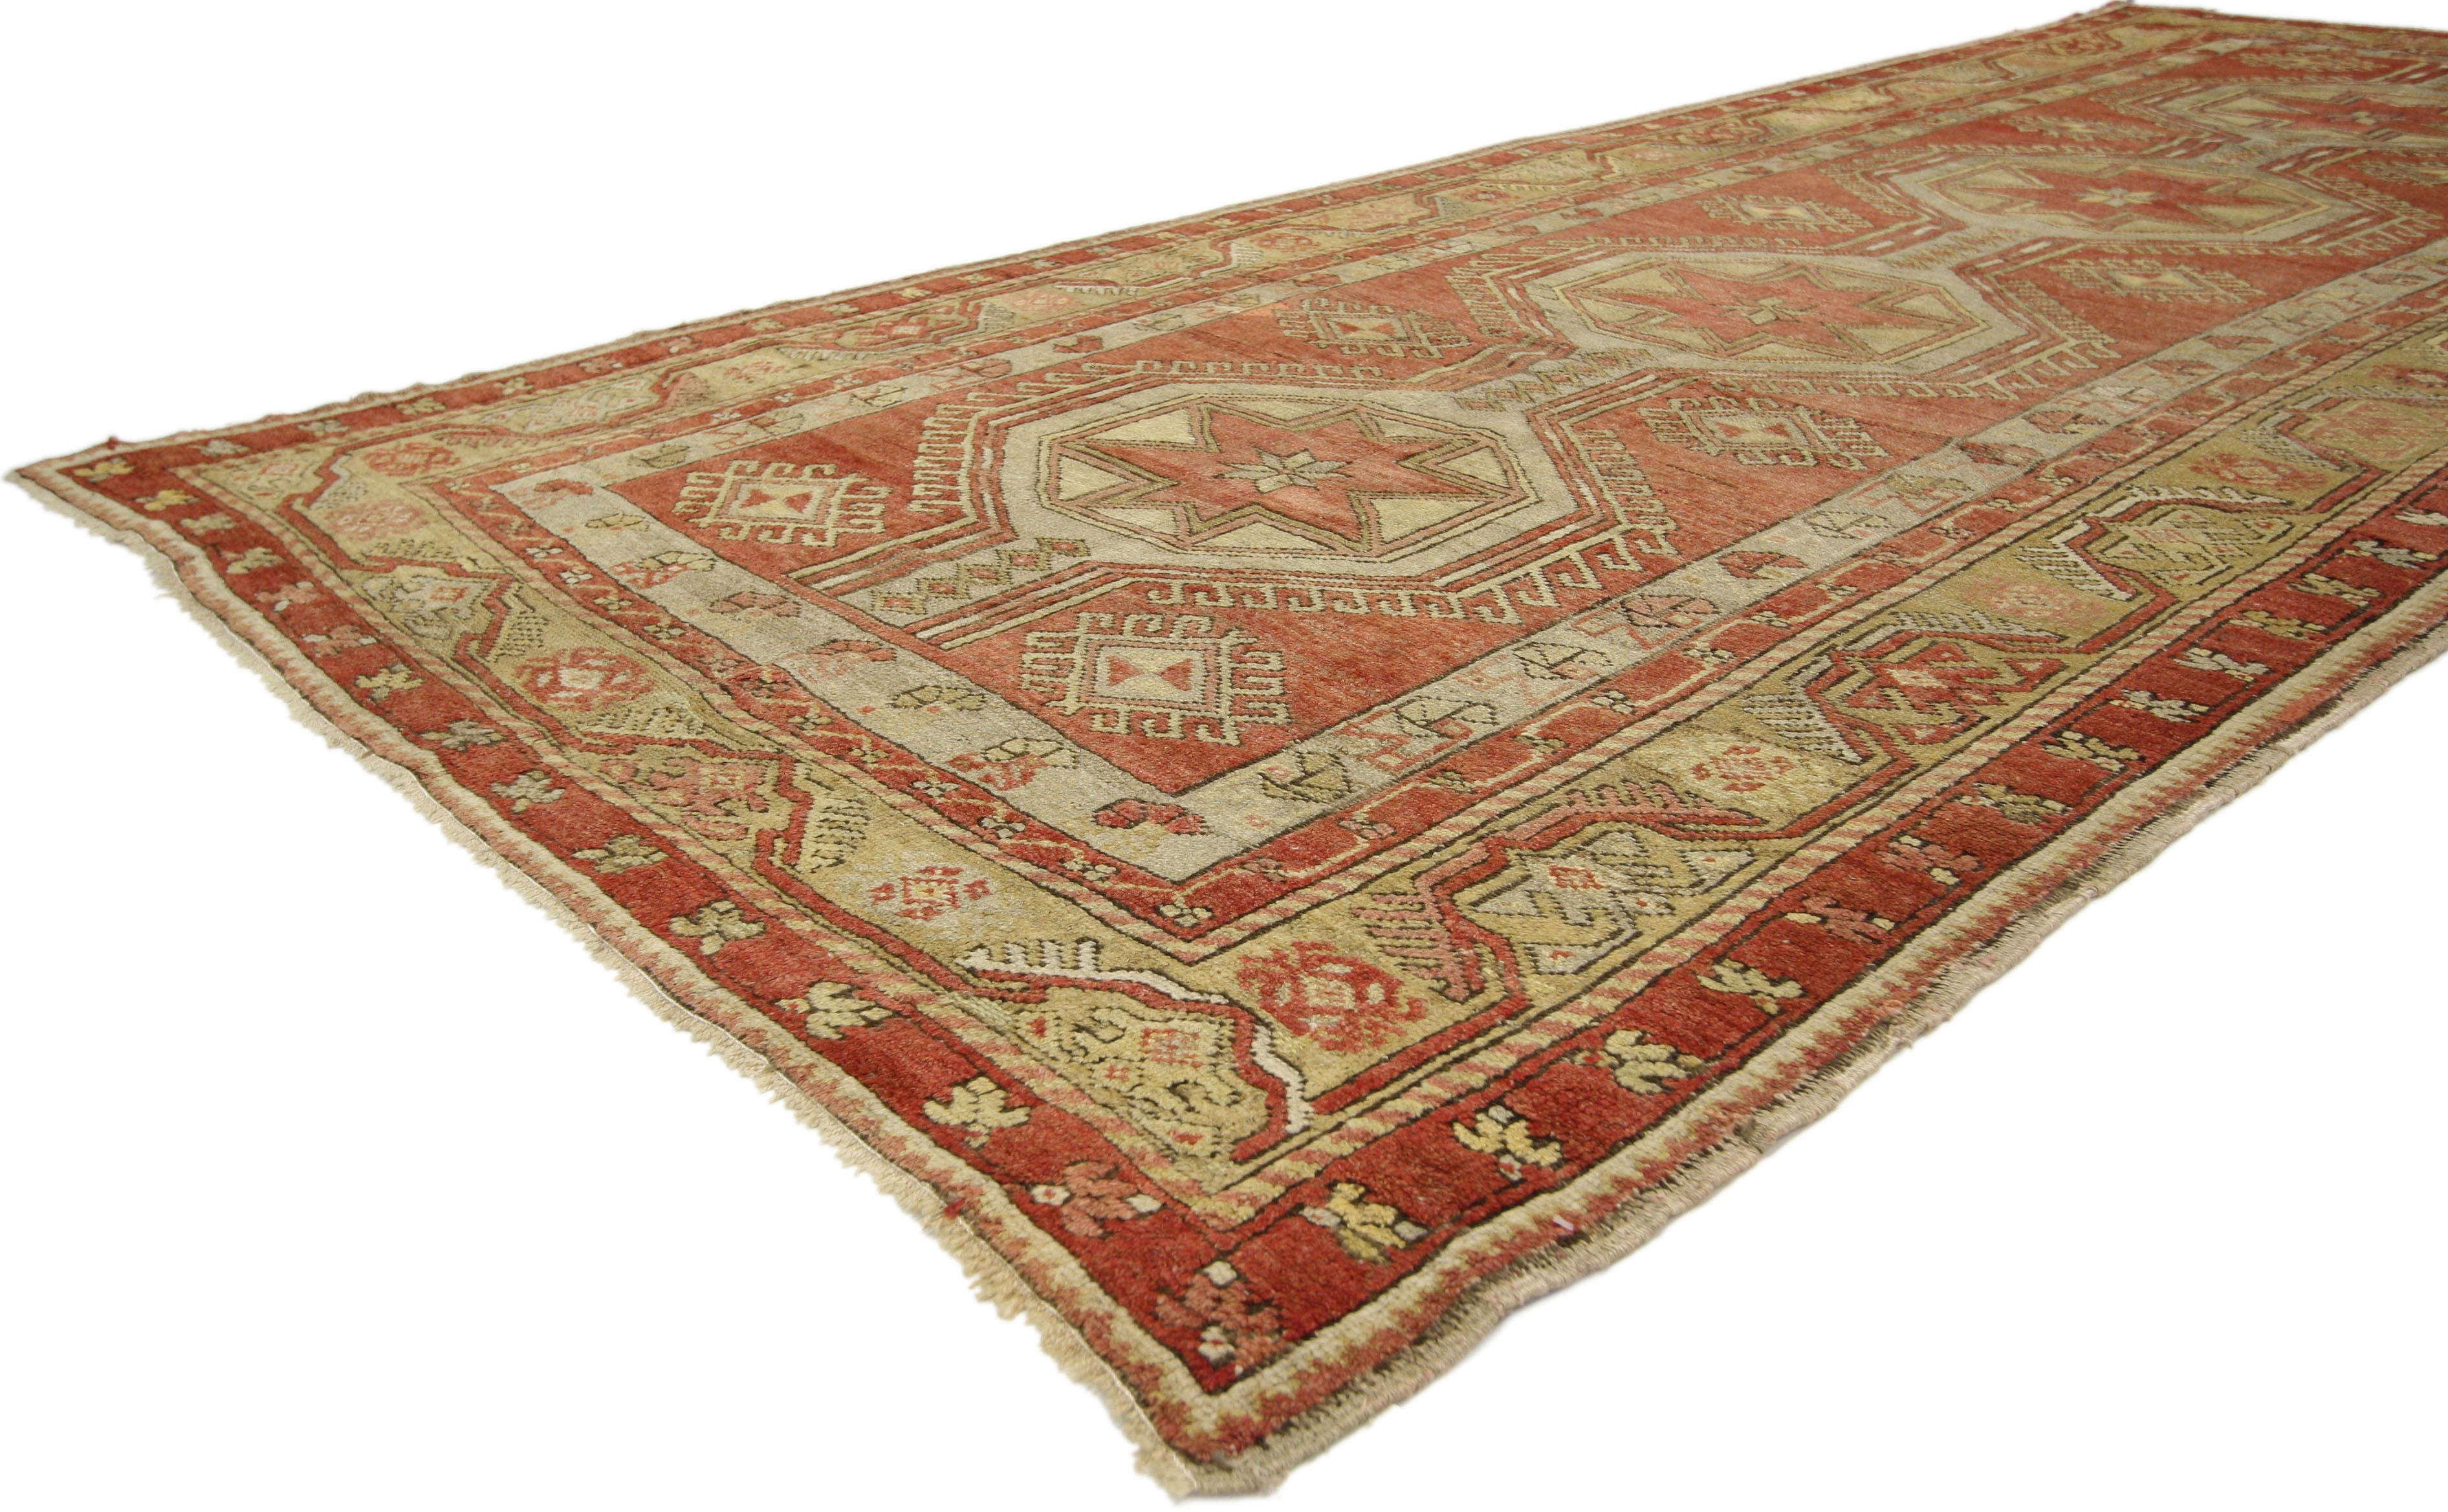 73879 Vintage Turkish Oushak Gallery Rug, Wide Hallway Runner 05'05 x 12'10. This vintage Turkish Oushak carpet runner handsomely communicates some of the finer and more important points of traditional Turkish design elements. Features a stacked row